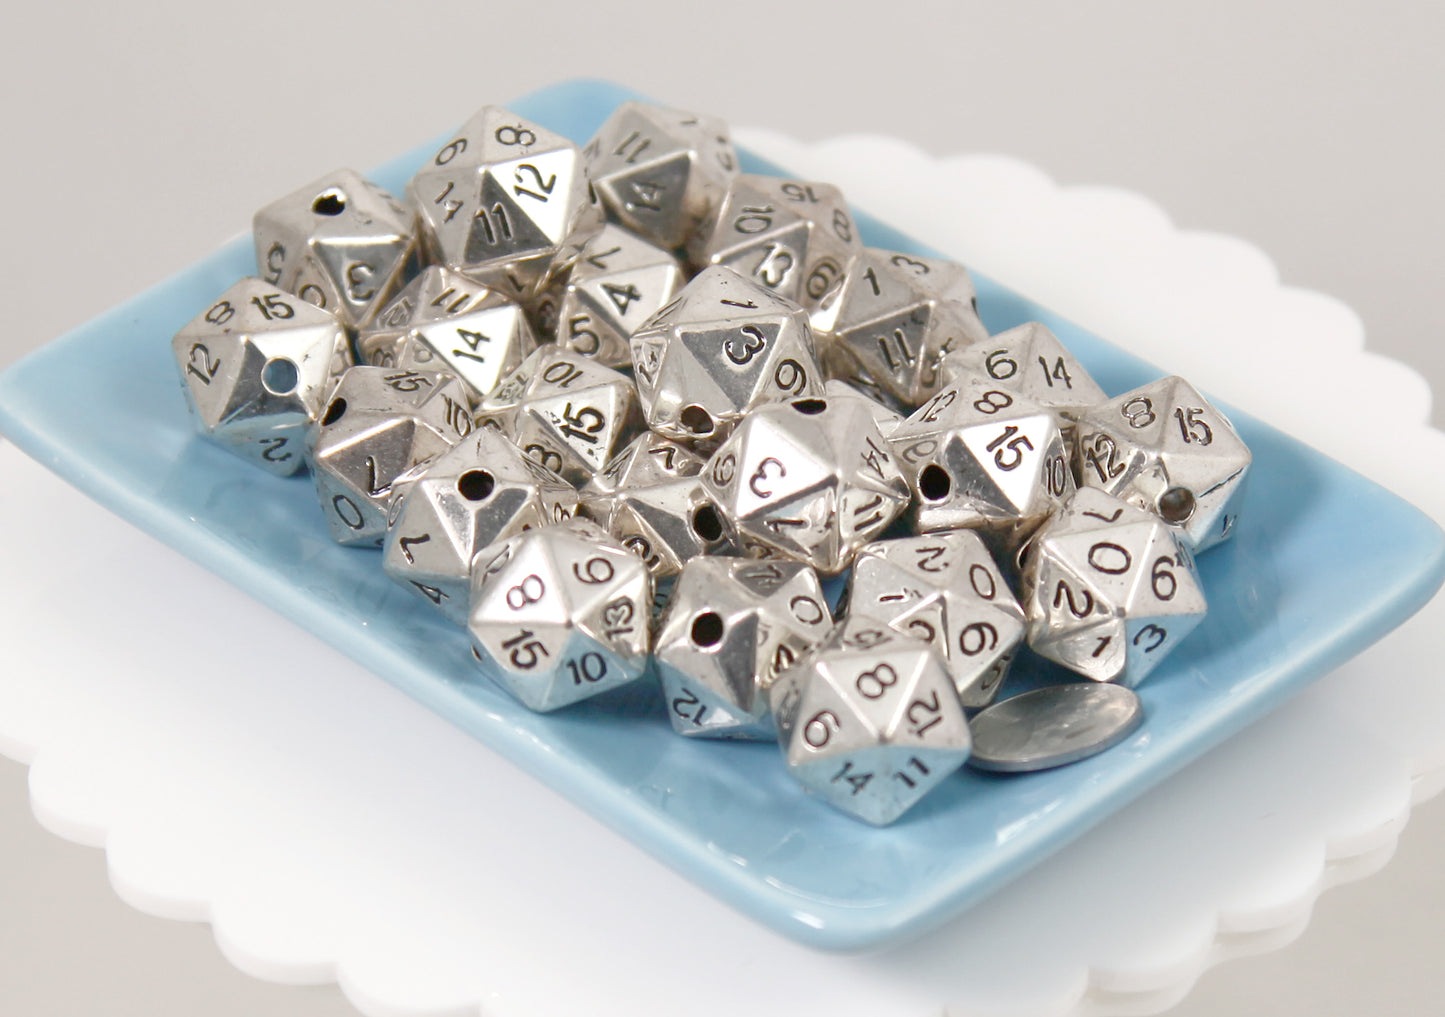 D20 Beads - 10 pc set - 20mm Polyhedral Dice Beads D12 D16 DND Beads - Electroplated Silver - Drilled with Holes to Easily make Jewelry